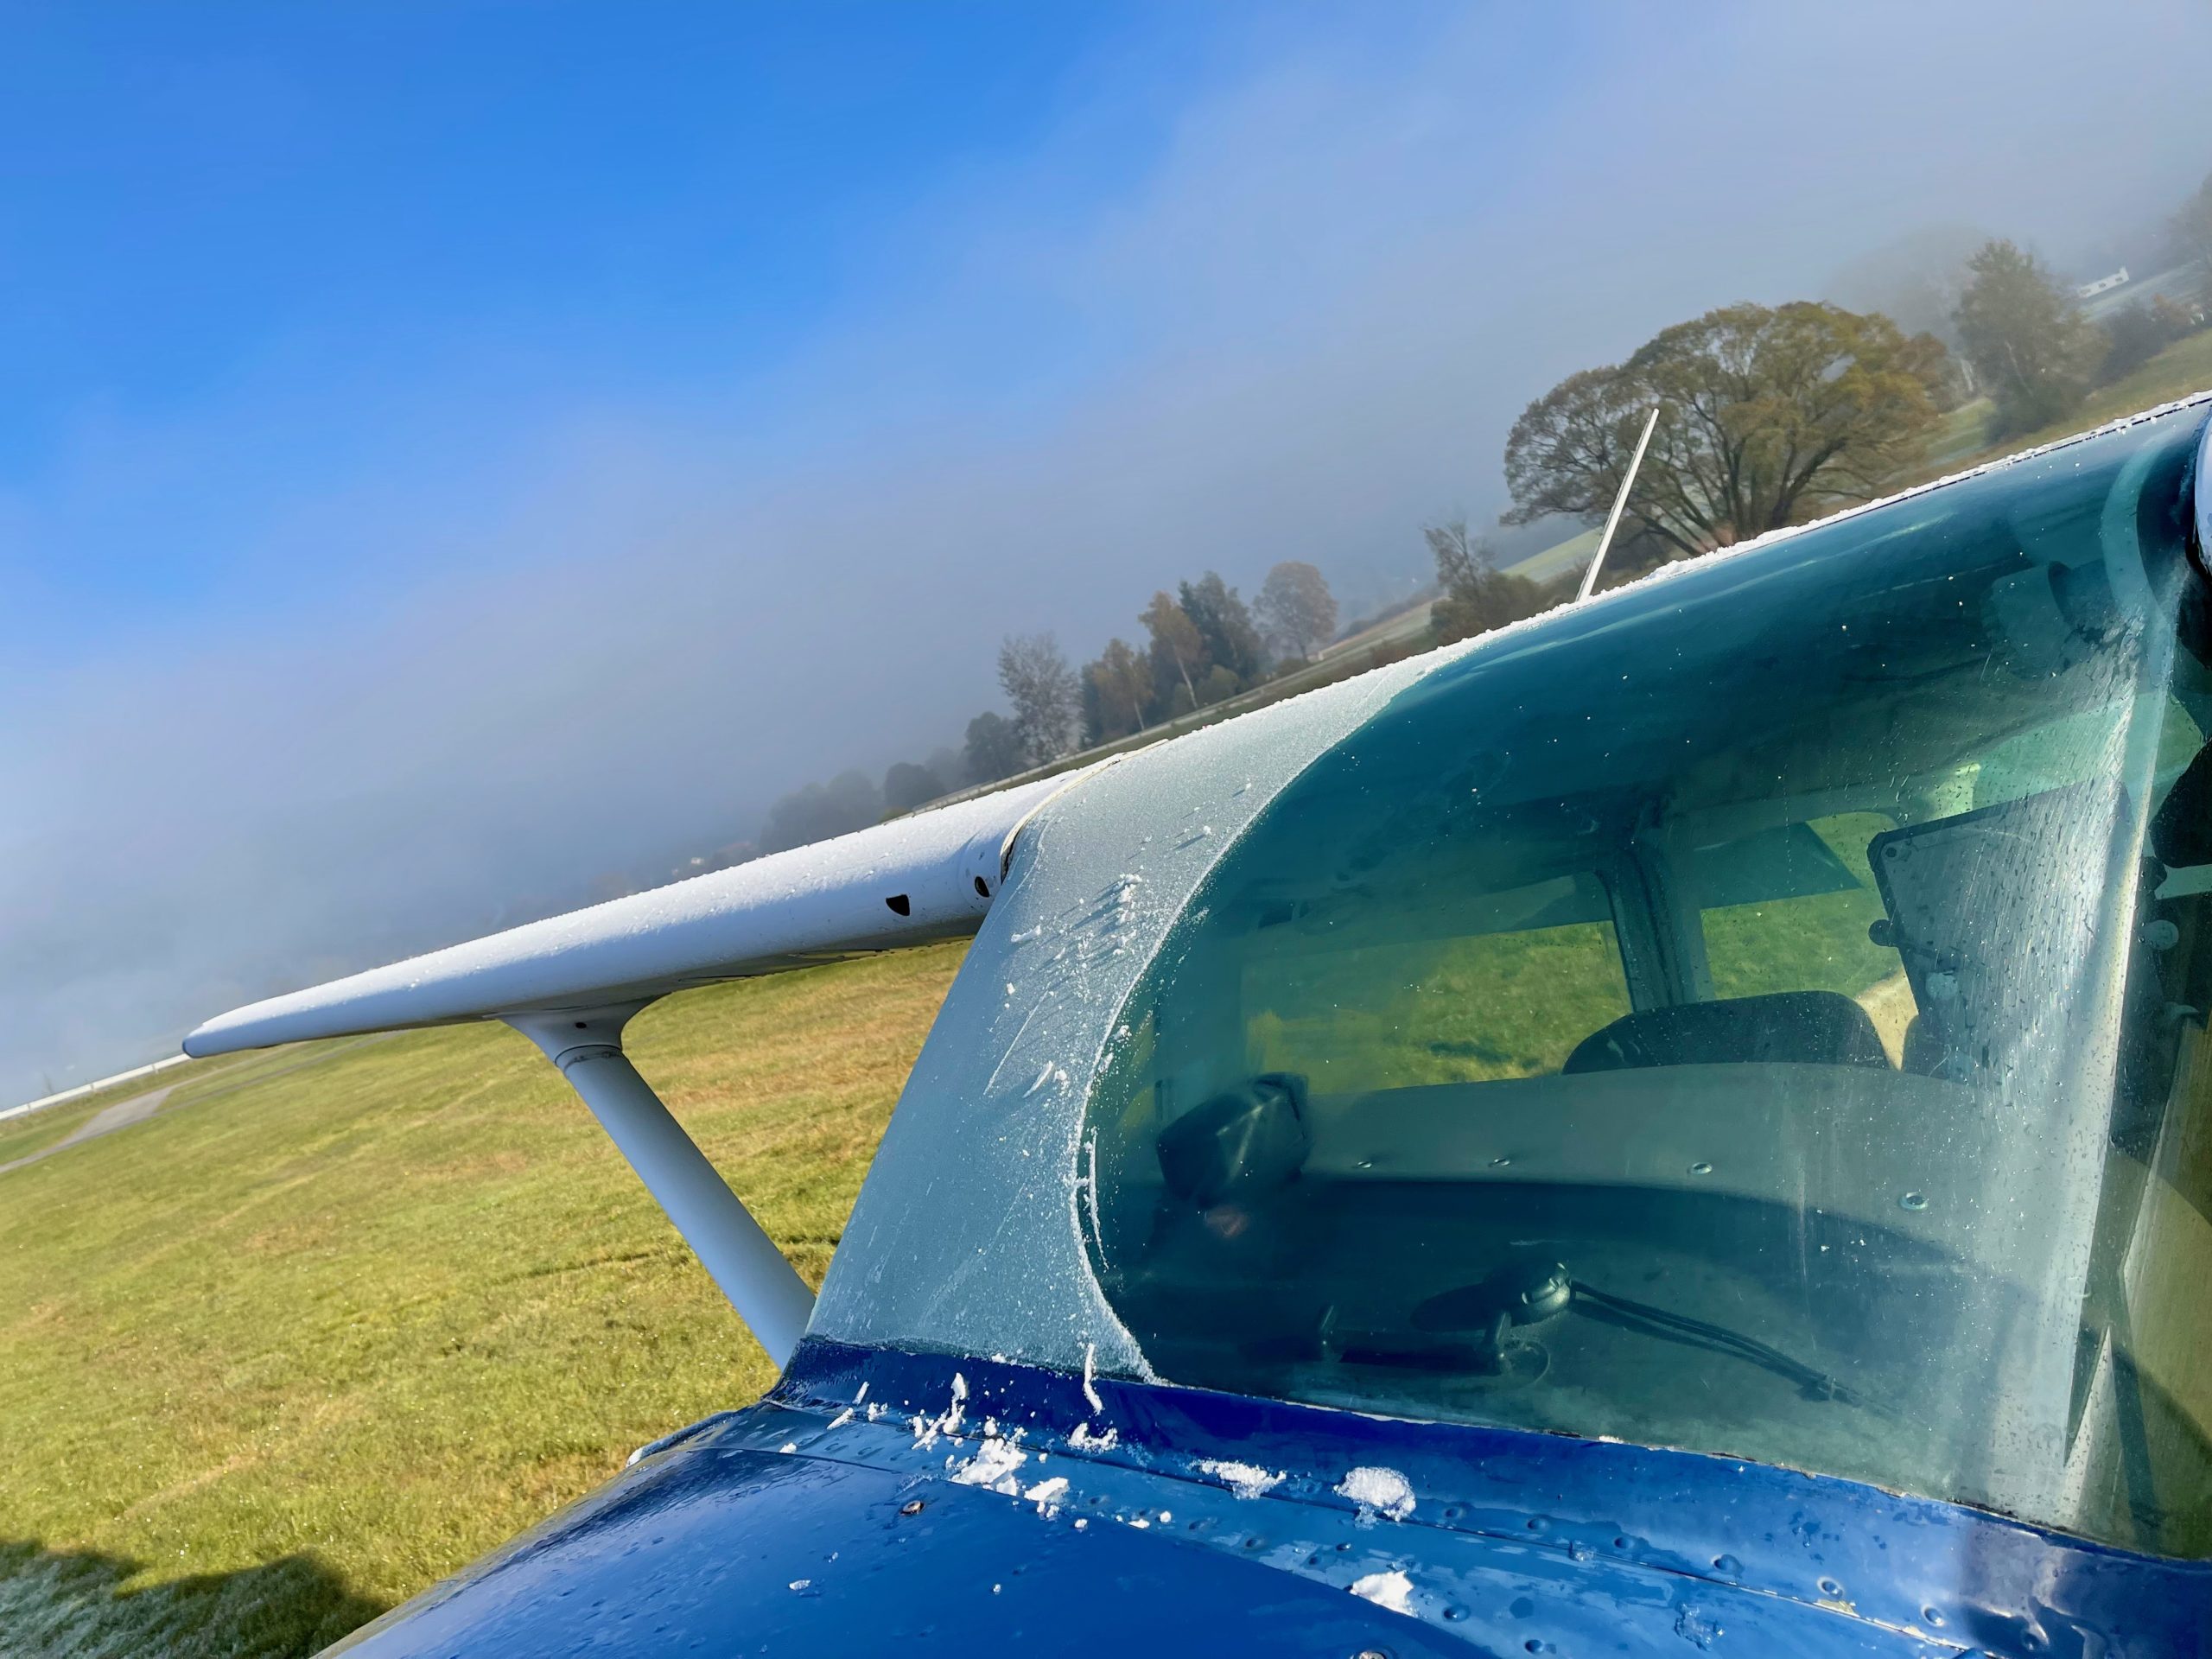 Safety first – took a while to get all the frost off the wings and windshield